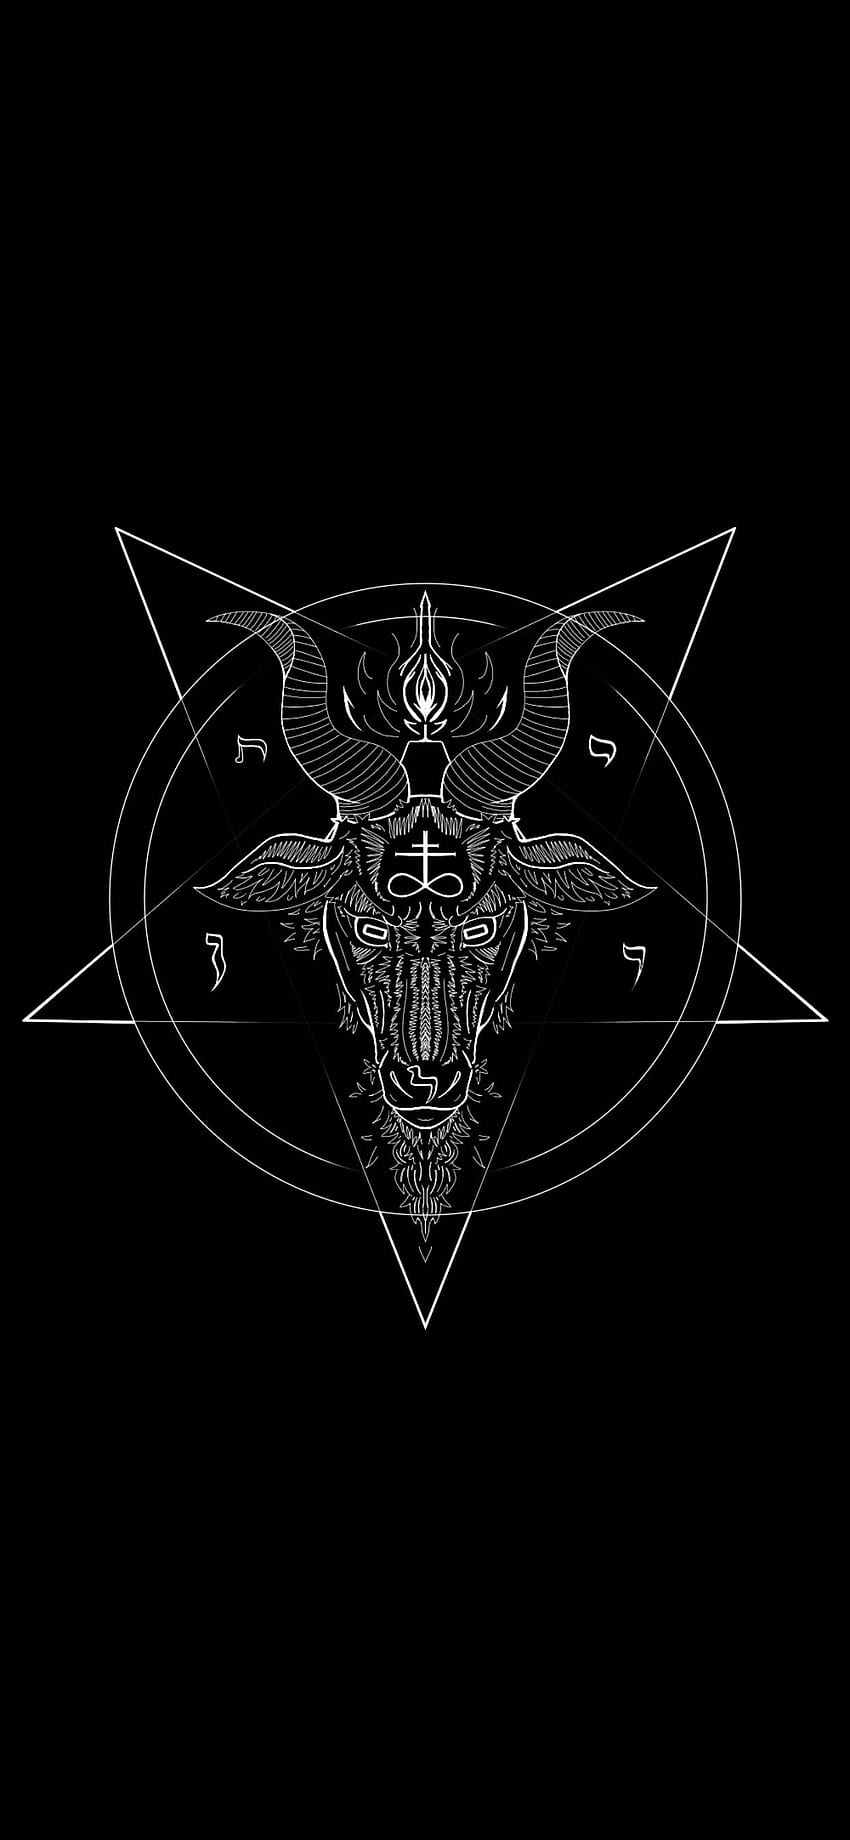 Saw someone post about . Here's a cool one I like. : satanism HD phone wallpaper